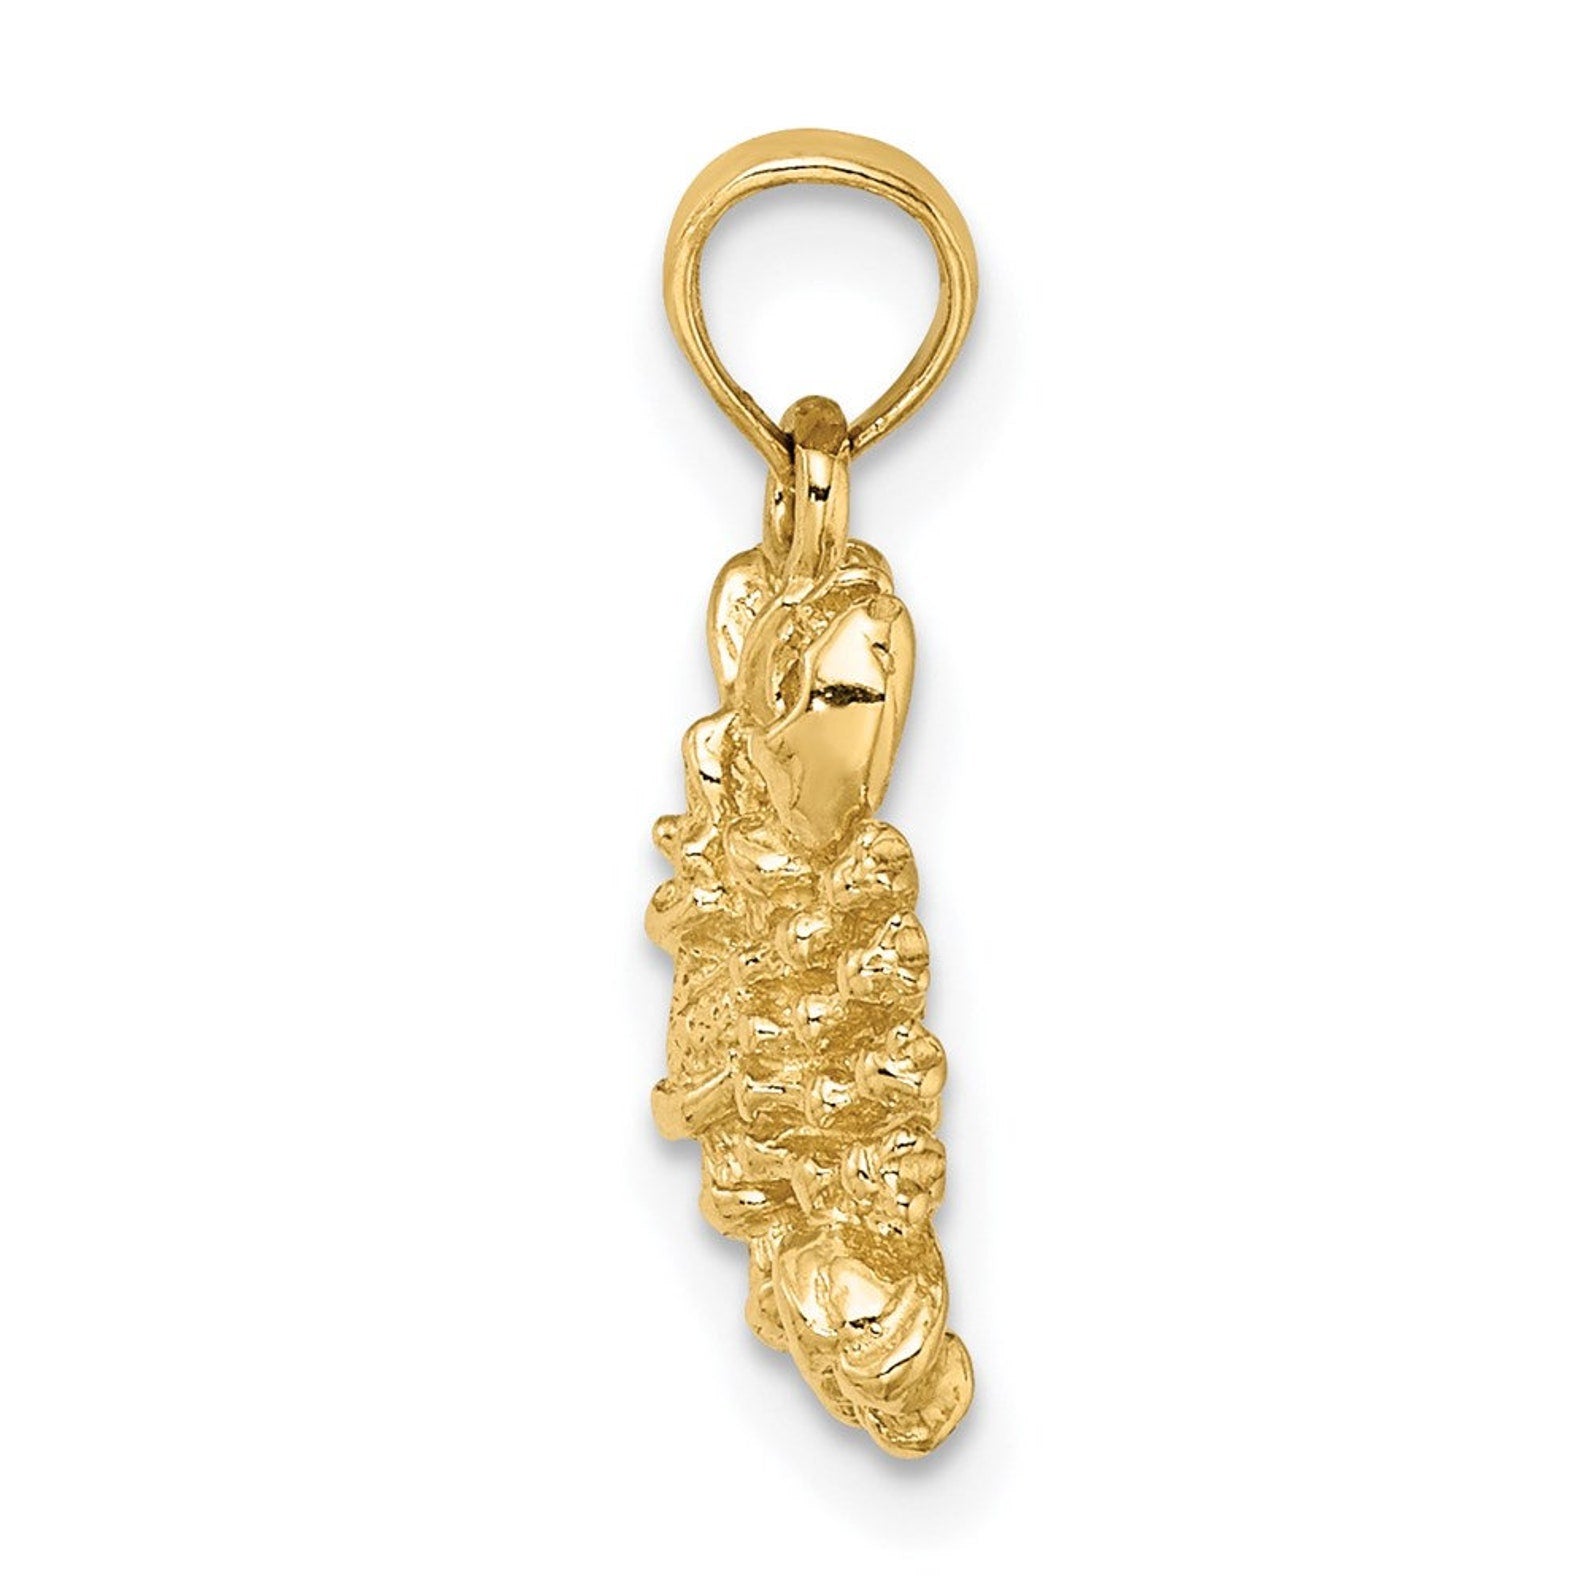 Gold Small 3D Scorpion Pendant - Charlie & Co. Jewelry